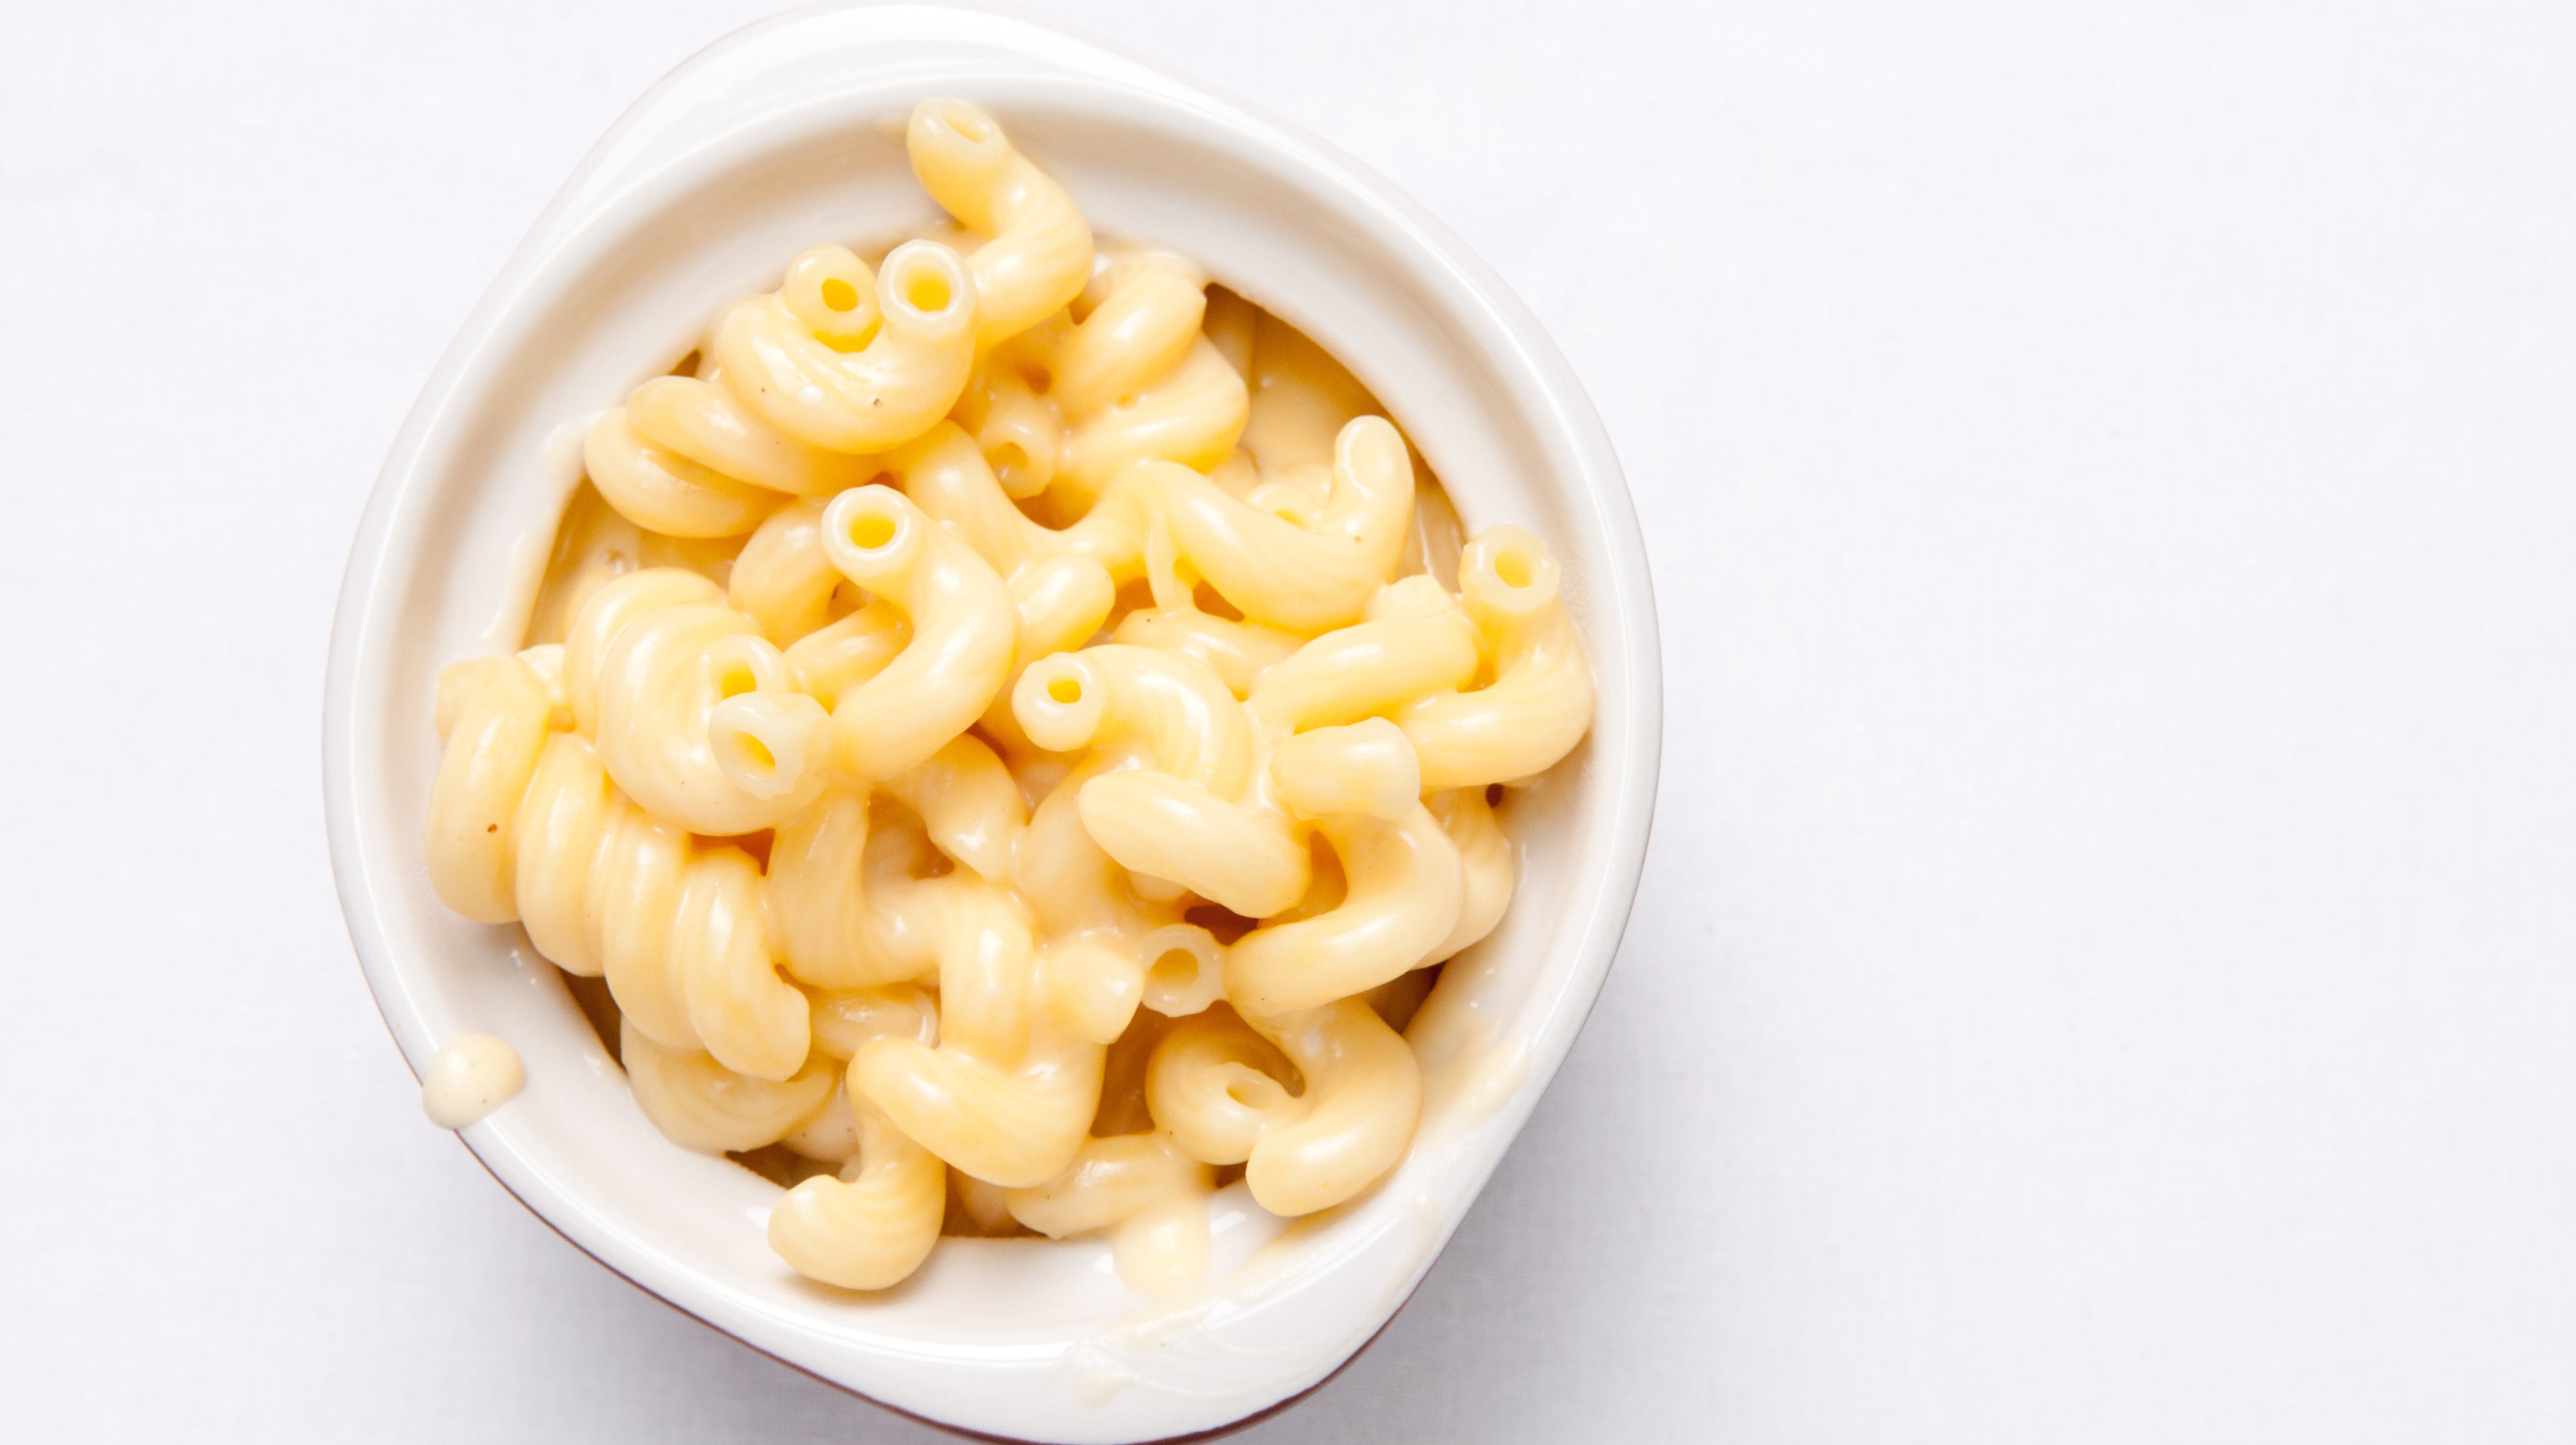 There’s Nothing Wrong With This Way Of Preparing Mac And Cheese